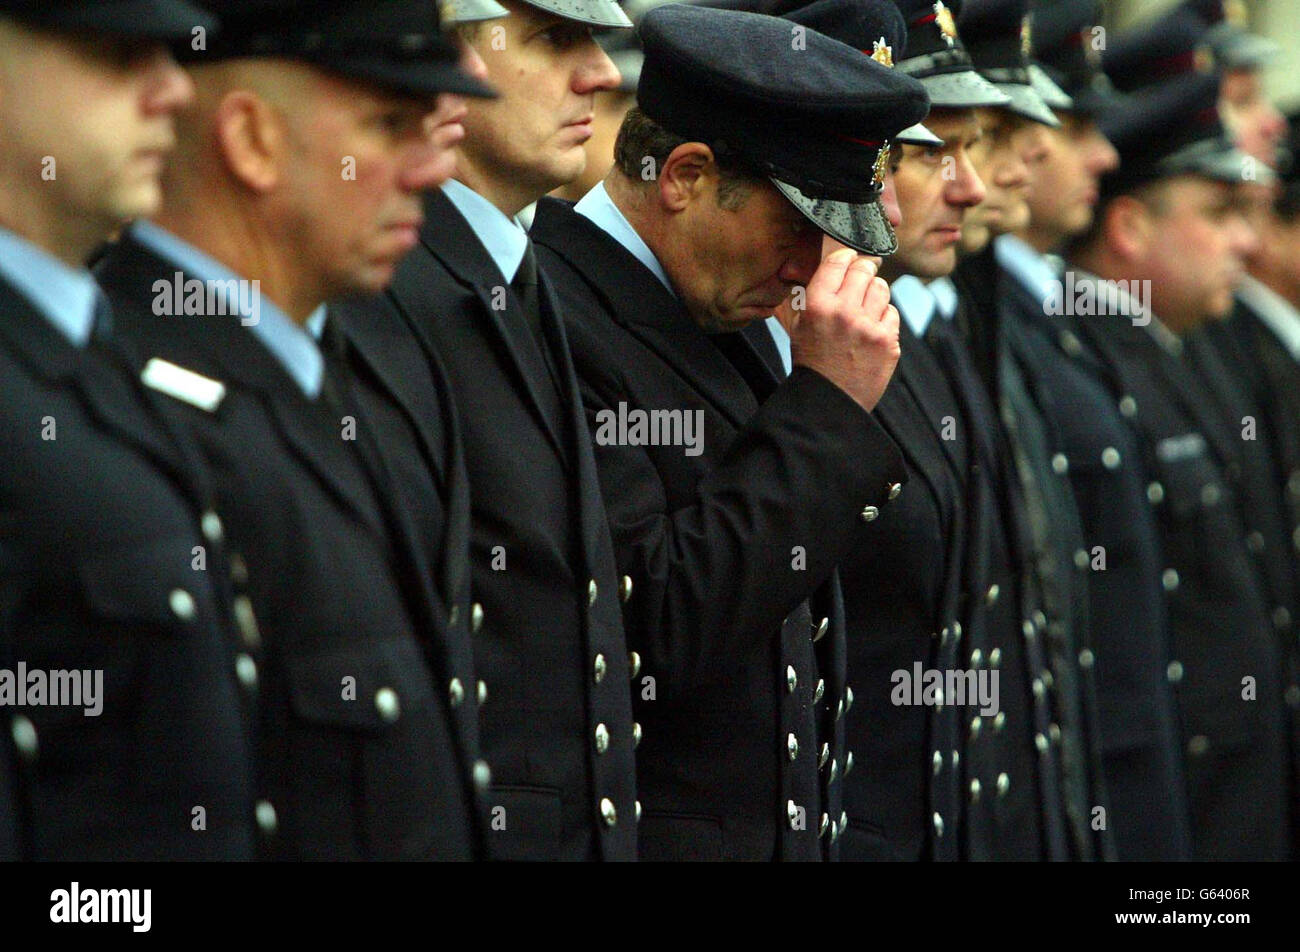 Friends and collegues at the funeral service of Leicestershire fireman Robert Miller, at Leicester Cathedral, paying their final respects. * Father-of-two Bob Miller, 44, died October 31 after falling through a floor while searching for occupants in derelict premises in Morledge Street, Leicester. Stock Photo